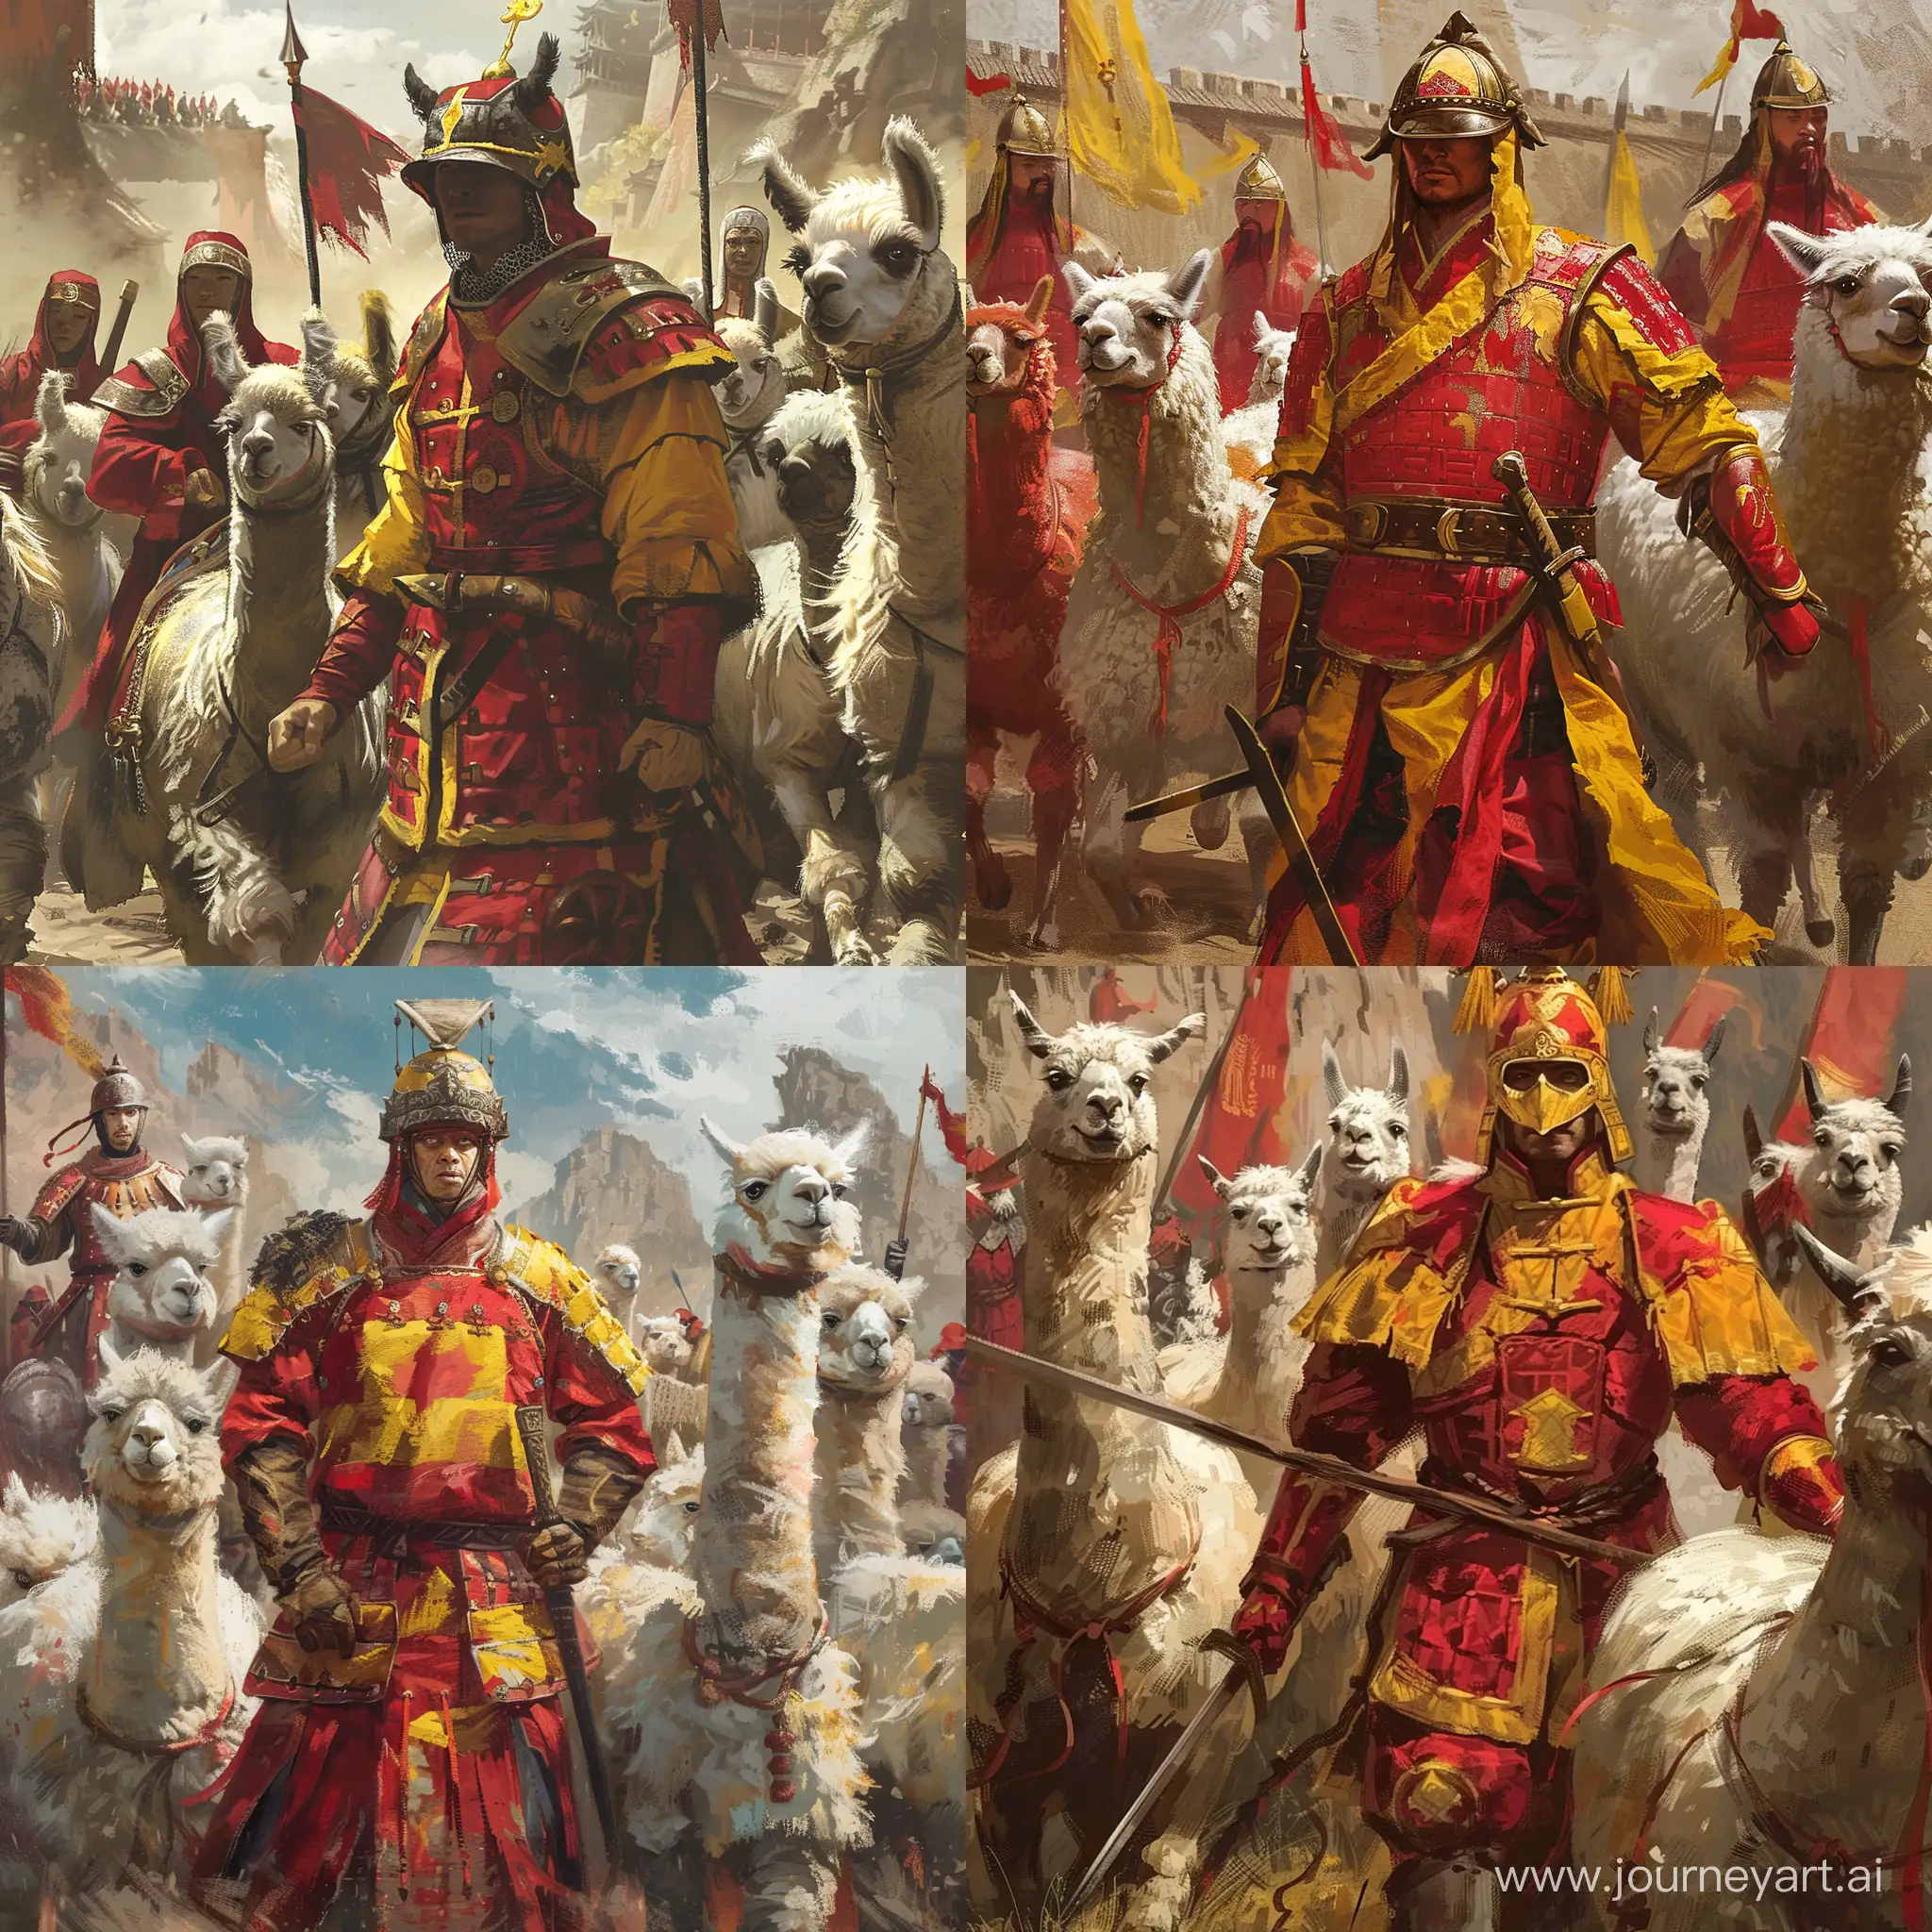 Medieval Chinese solider in red and yellow armour with visor helmet.

He is herding a folk of alpaca warriors.